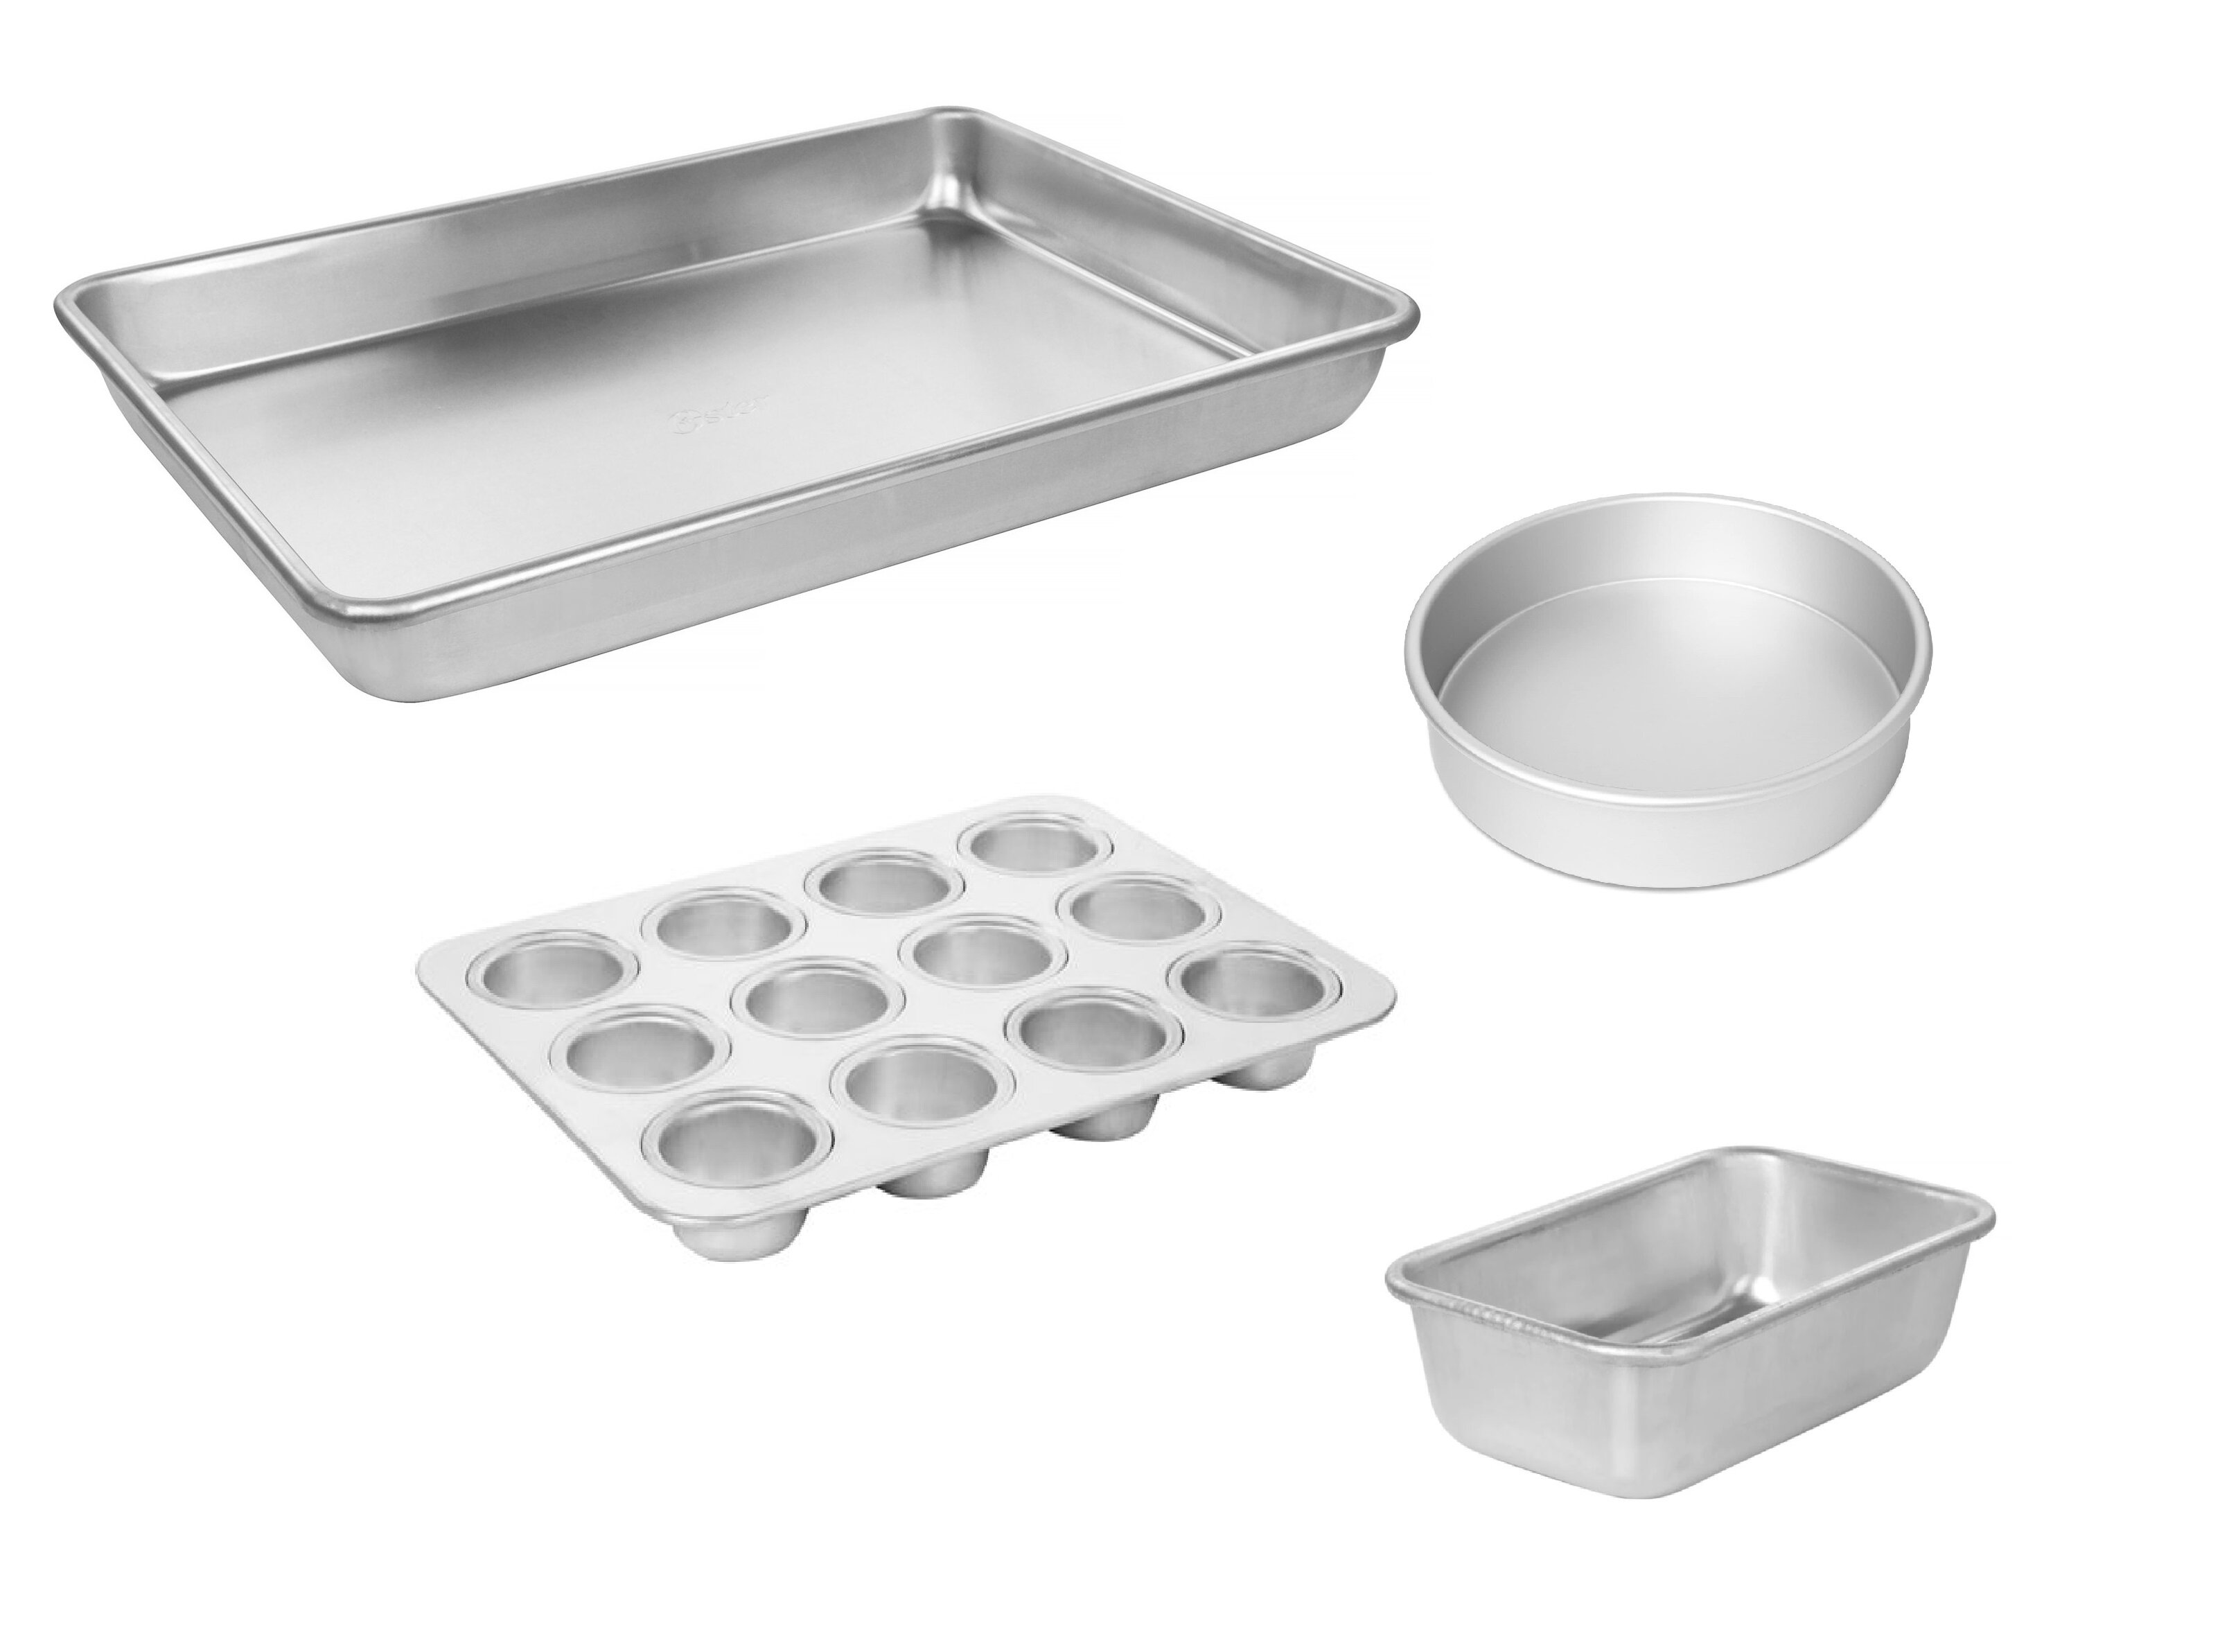 Hostess Aluminum Roll Cake Pan With Lid 2 Pack